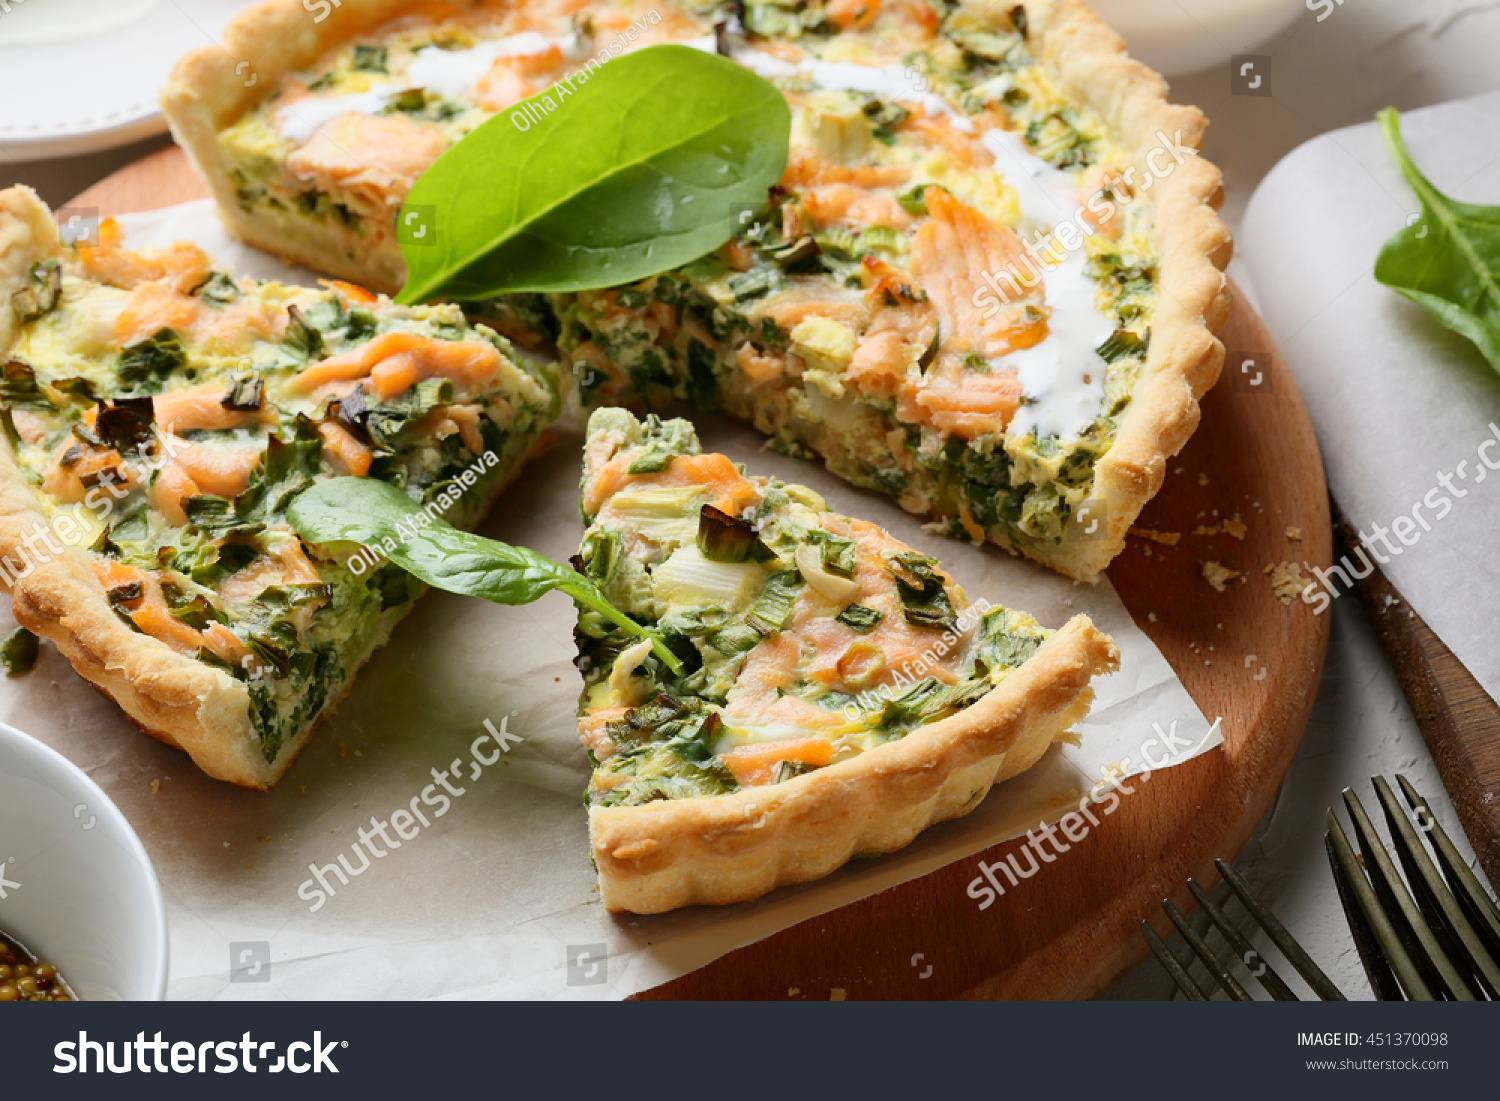 Spinach And Fish Quiche, Food Close-Up Stock Photo 451370098 : Shutterstock